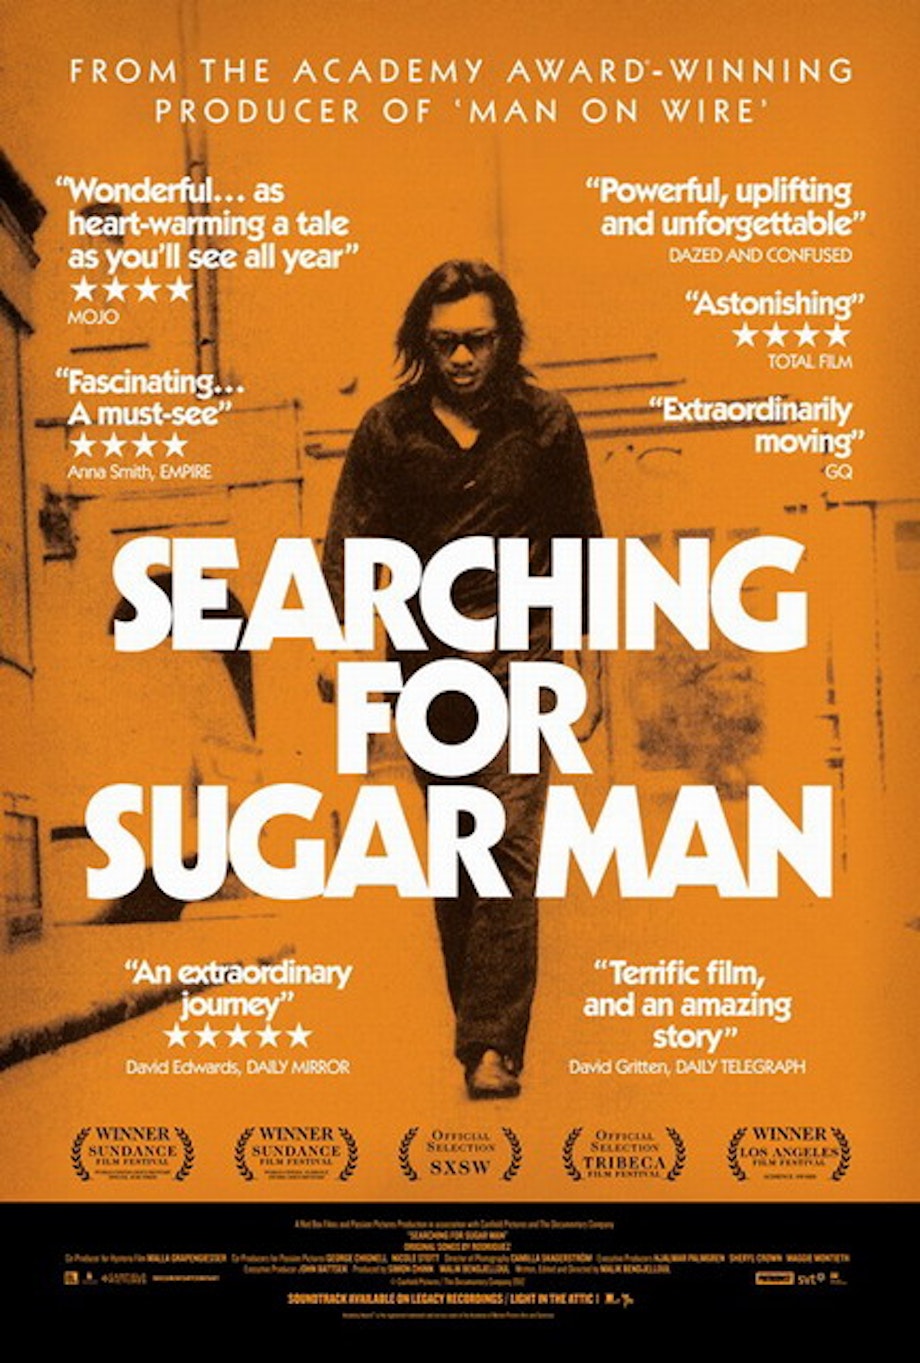 Red Box Films  Searching for Sugar Man  Films